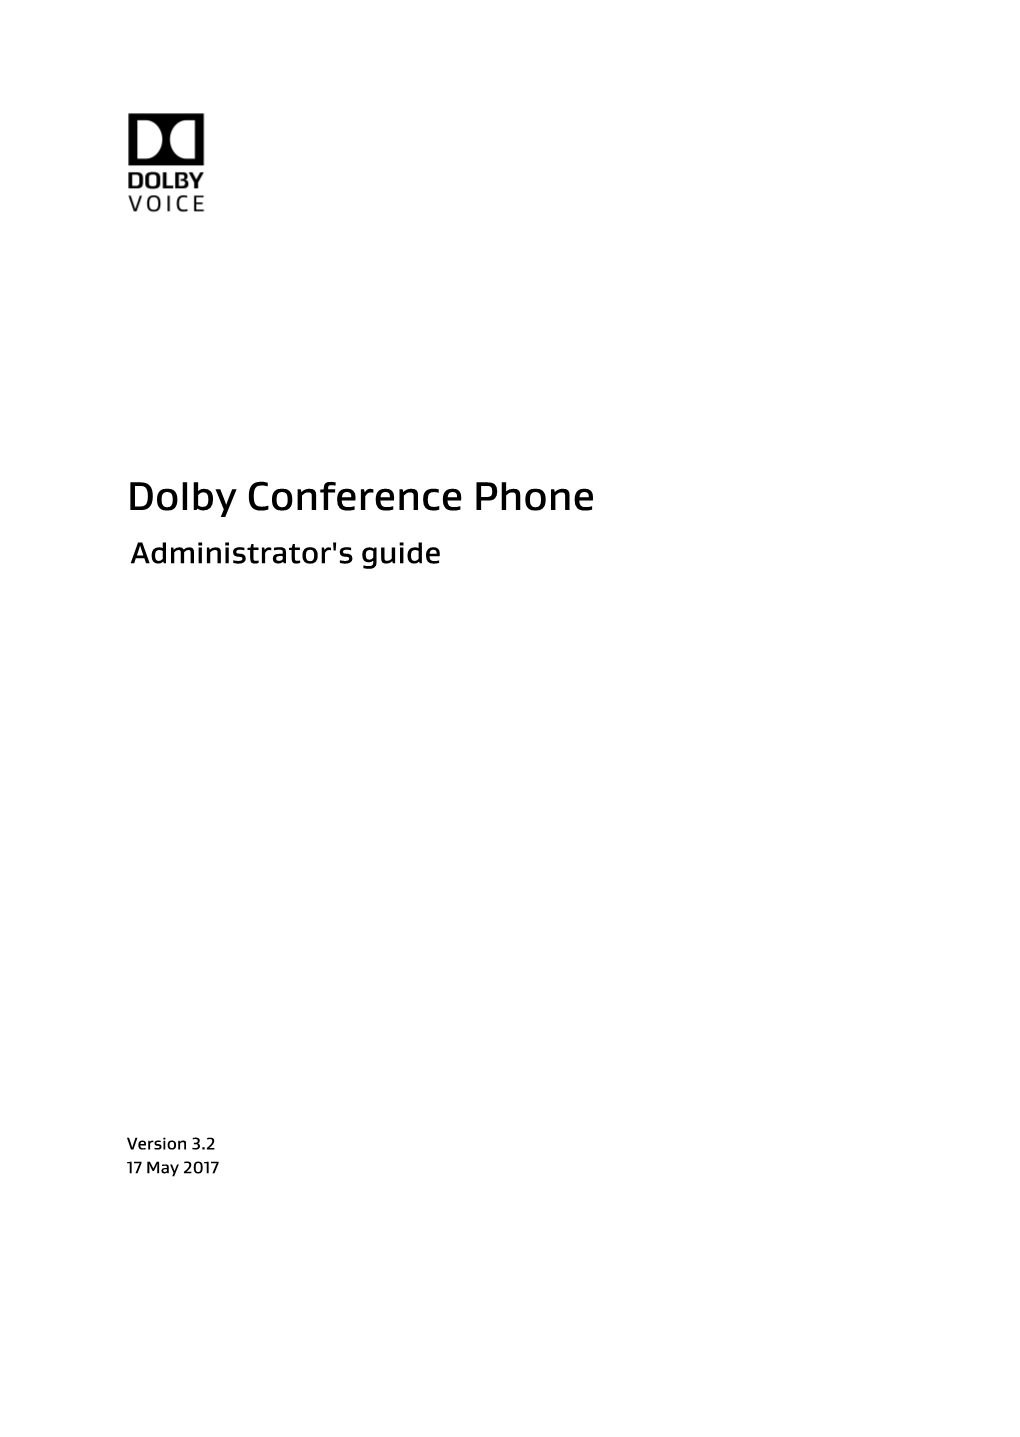 Dolby Conference Phone Administrator's Guide